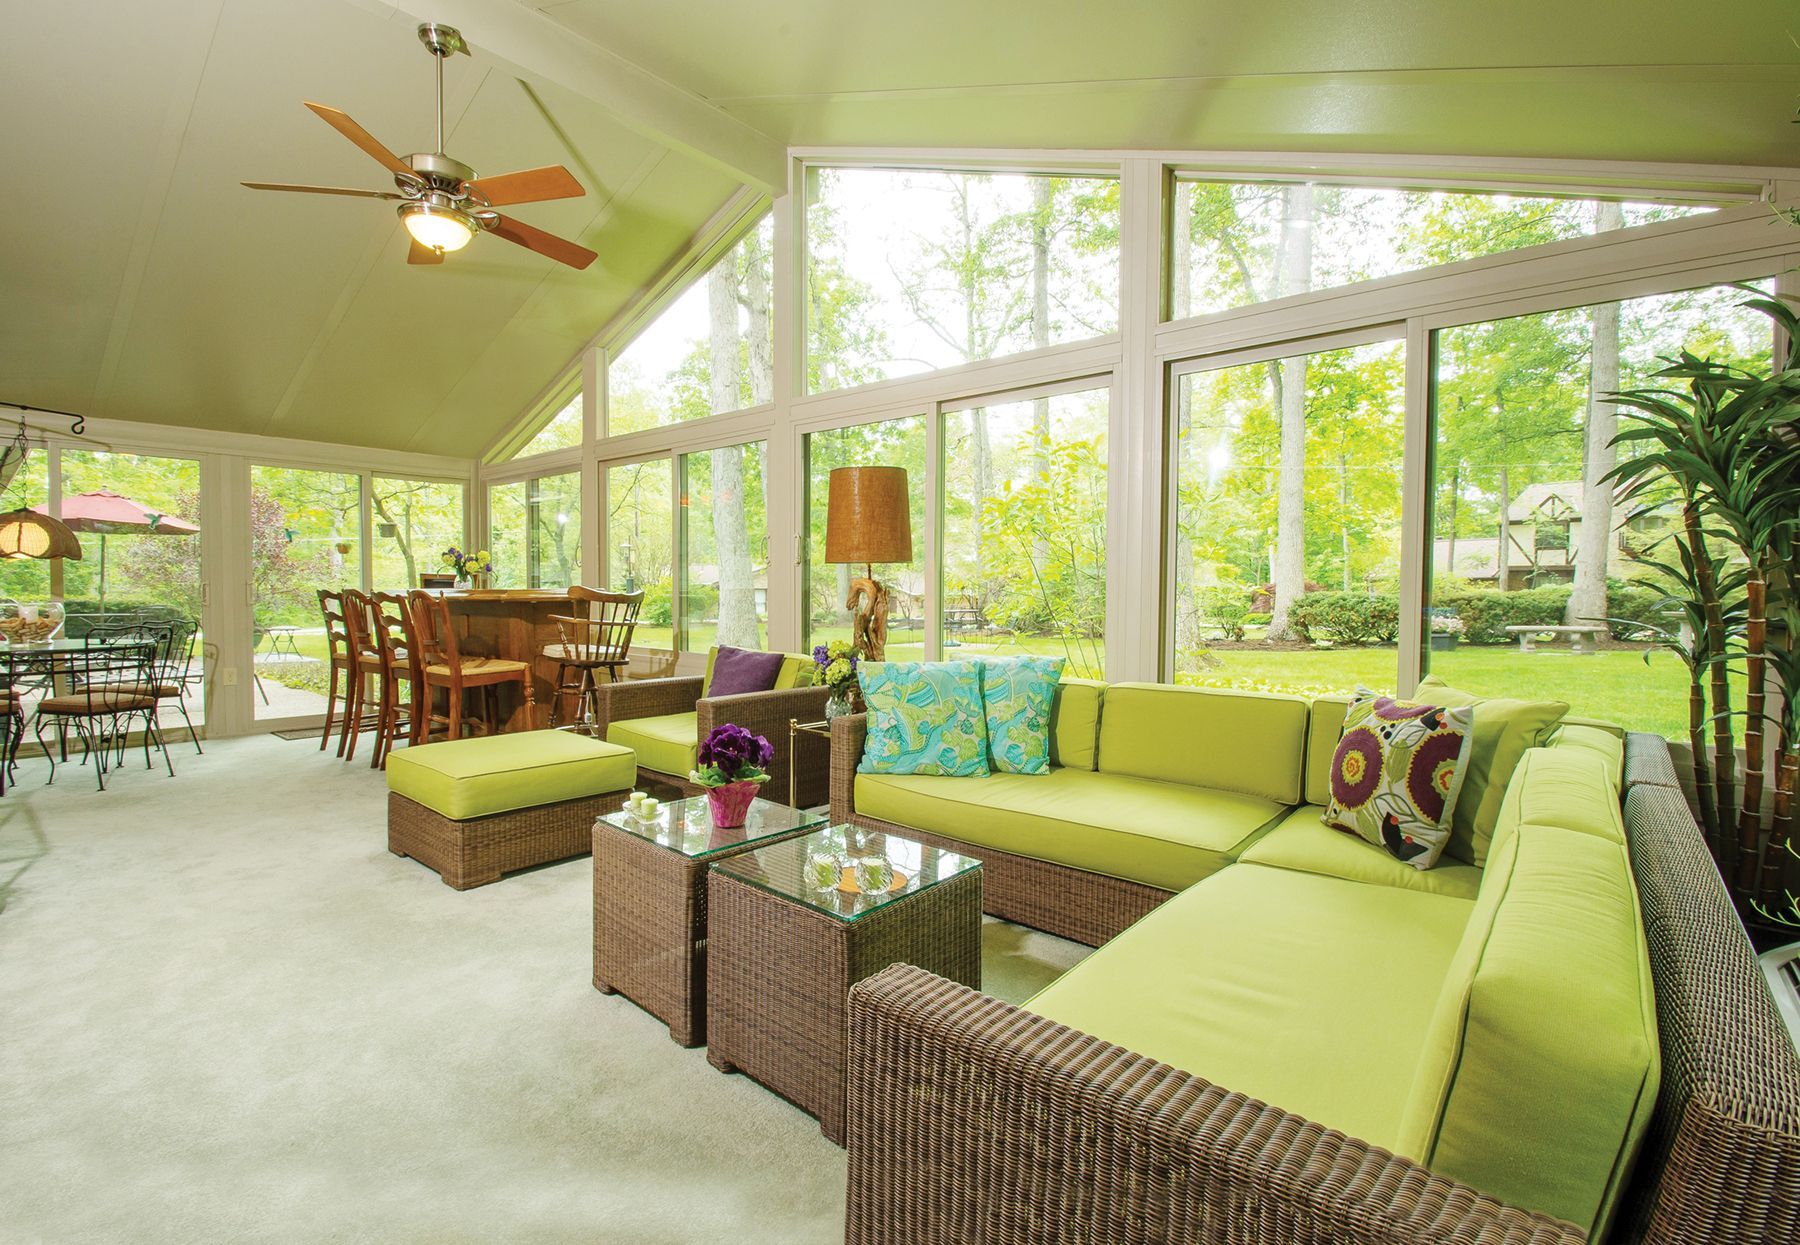 interior photo of a Betterliving sunrooms by Betterliving Patio and Sunrooms of Pittsburgh